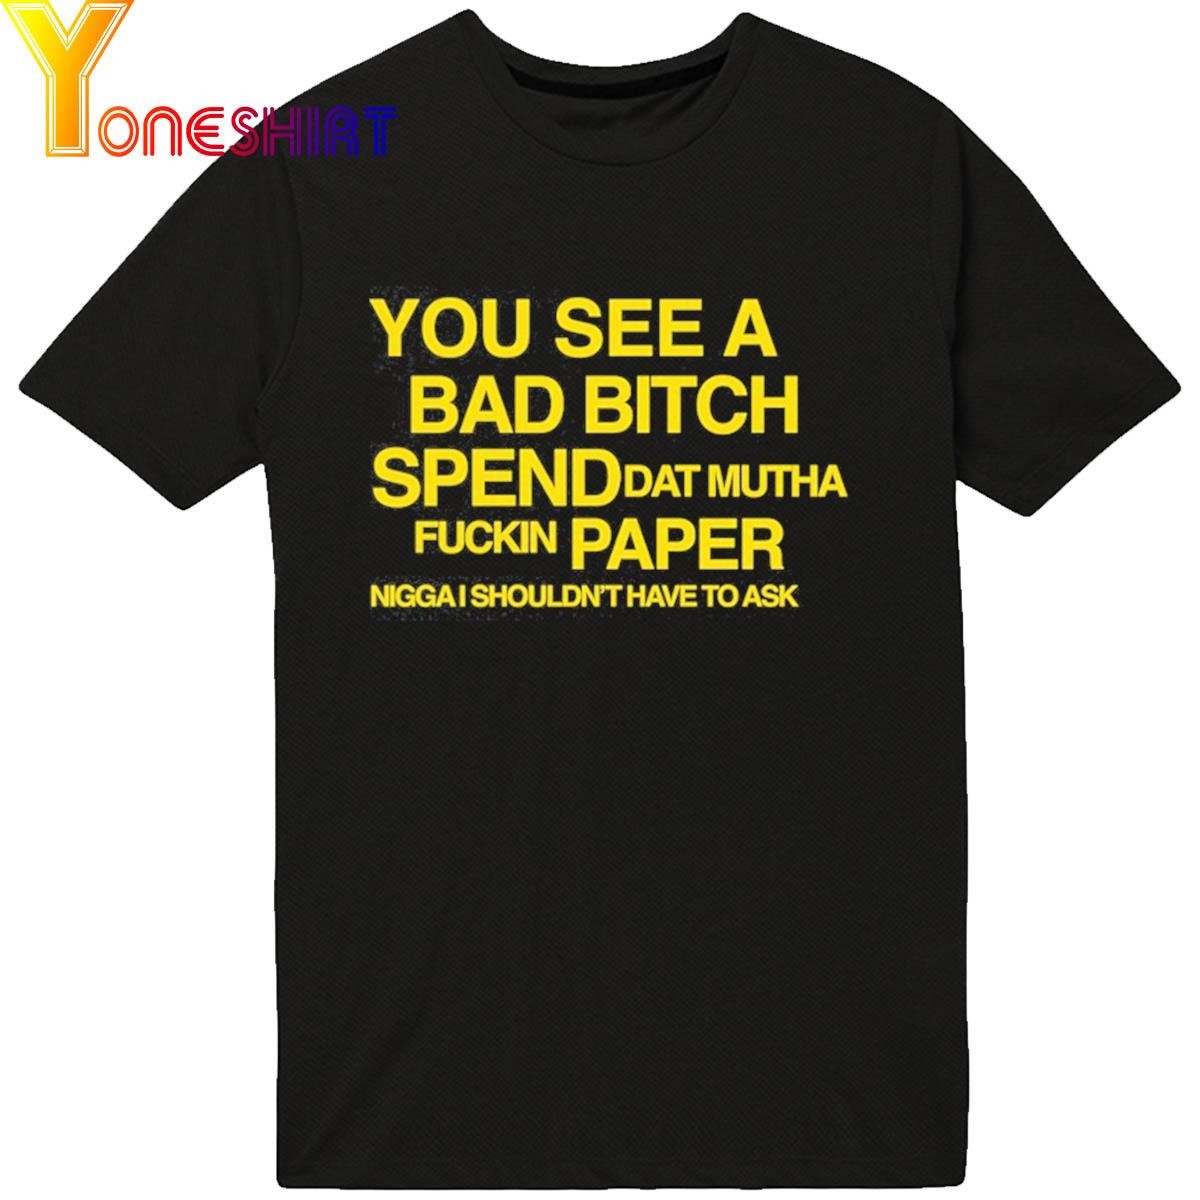 You See A Bad Bitch Spend Dat Mutha Fuckin Paper Nigga I Shouldn't Have To Ask shirt